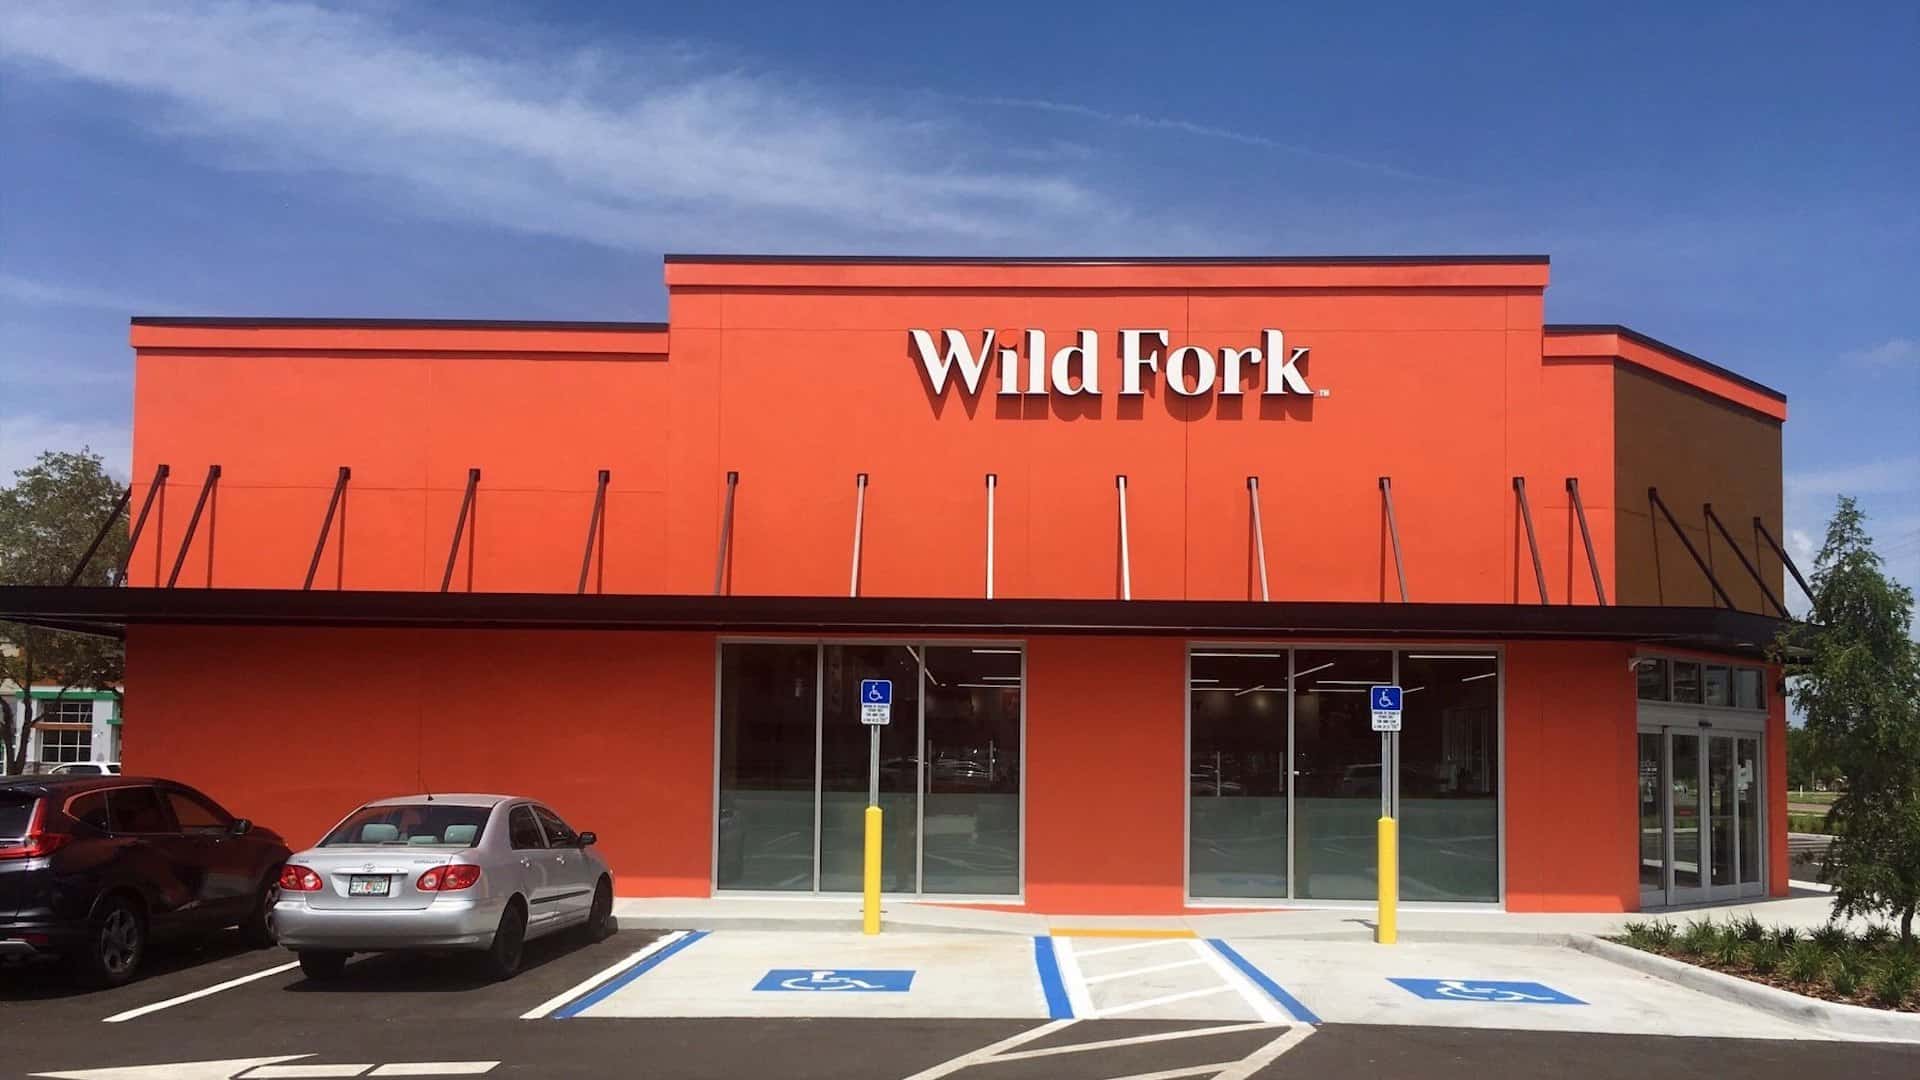 Wild forks locations